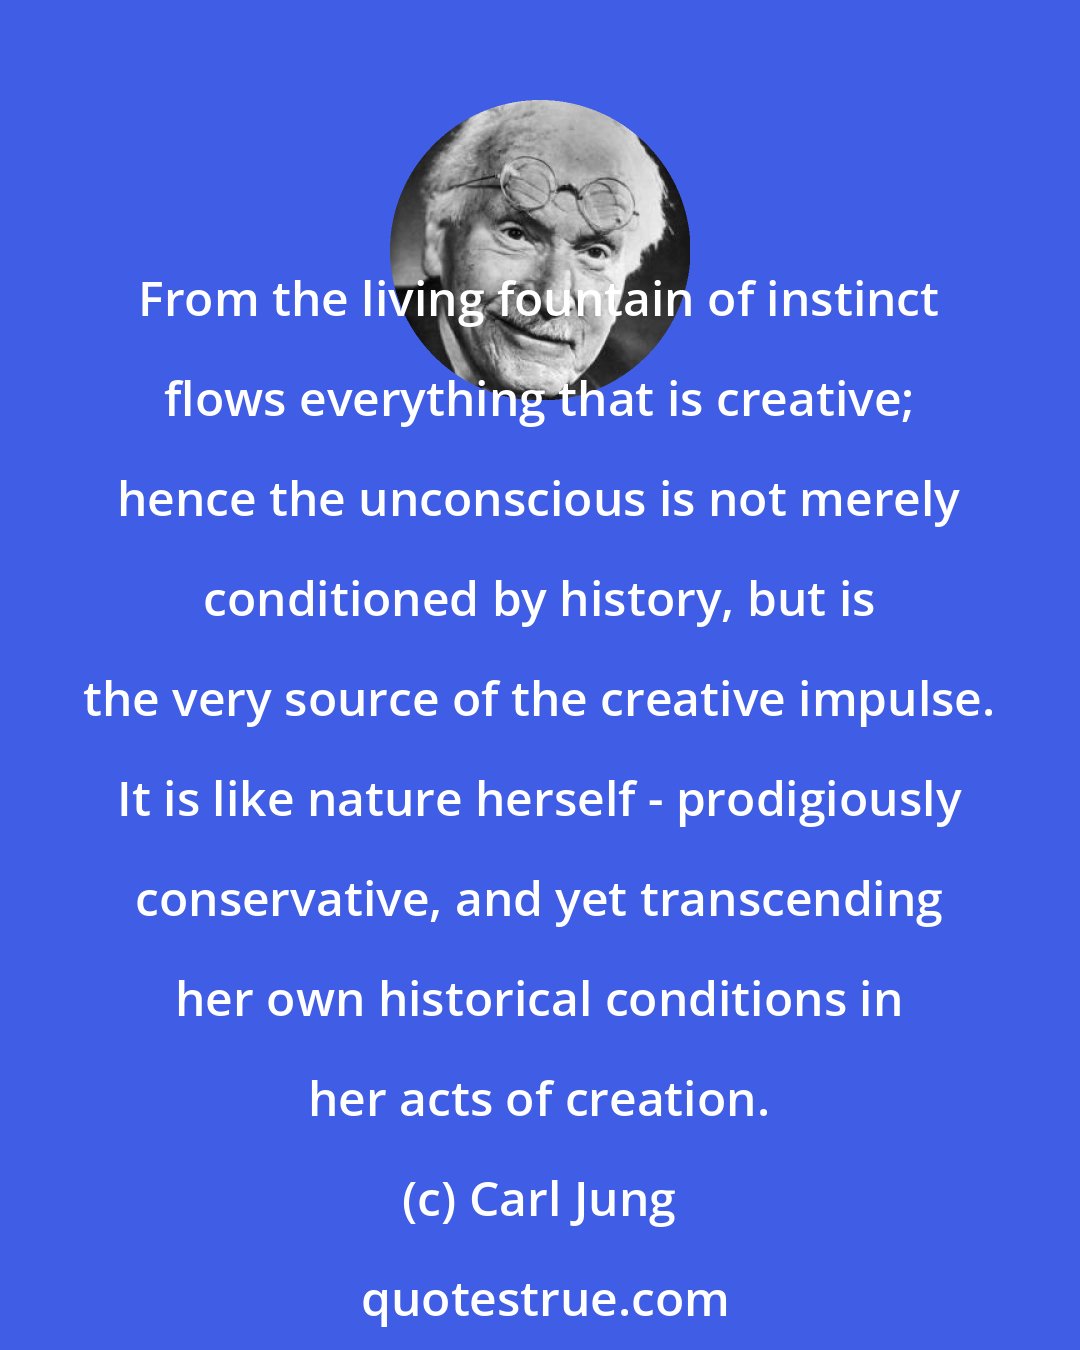 Carl Jung: From the living fountain of instinct flows everything that is creative; hence the unconscious is not merely conditioned by history, but is the very source of the creative impulse. It is like nature herself - prodigiously conservative, and yet transcending her own historical conditions in her acts of creation.